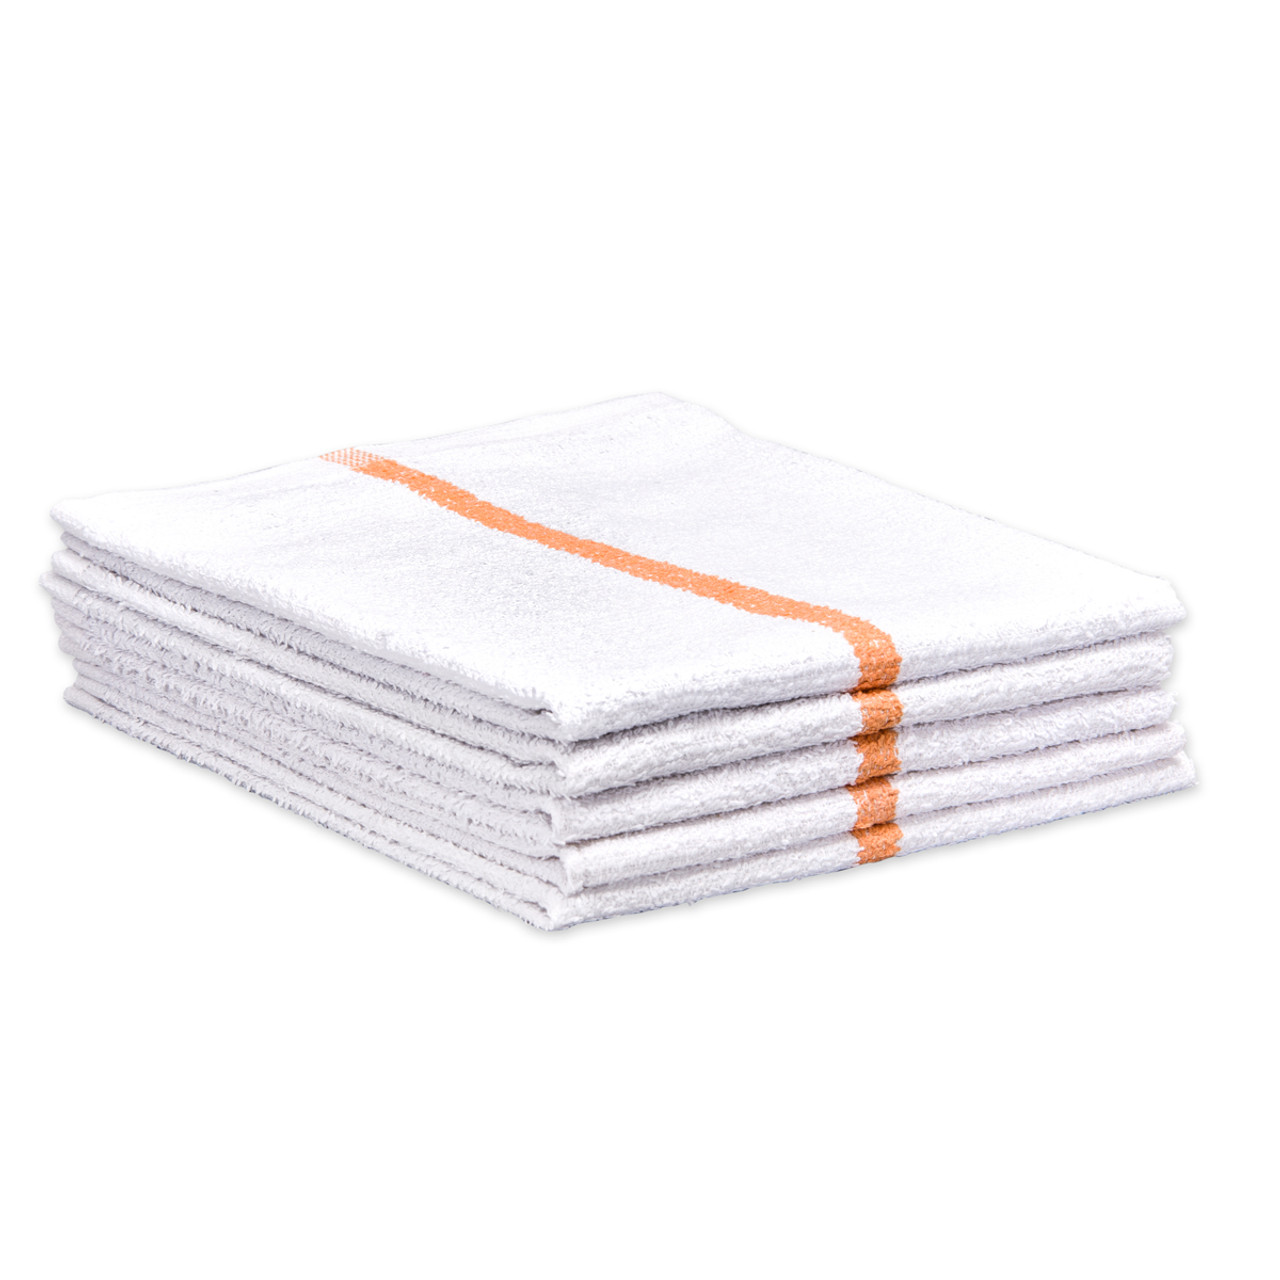 Terry Towels Heavy Weight Cotton, Shop Rags